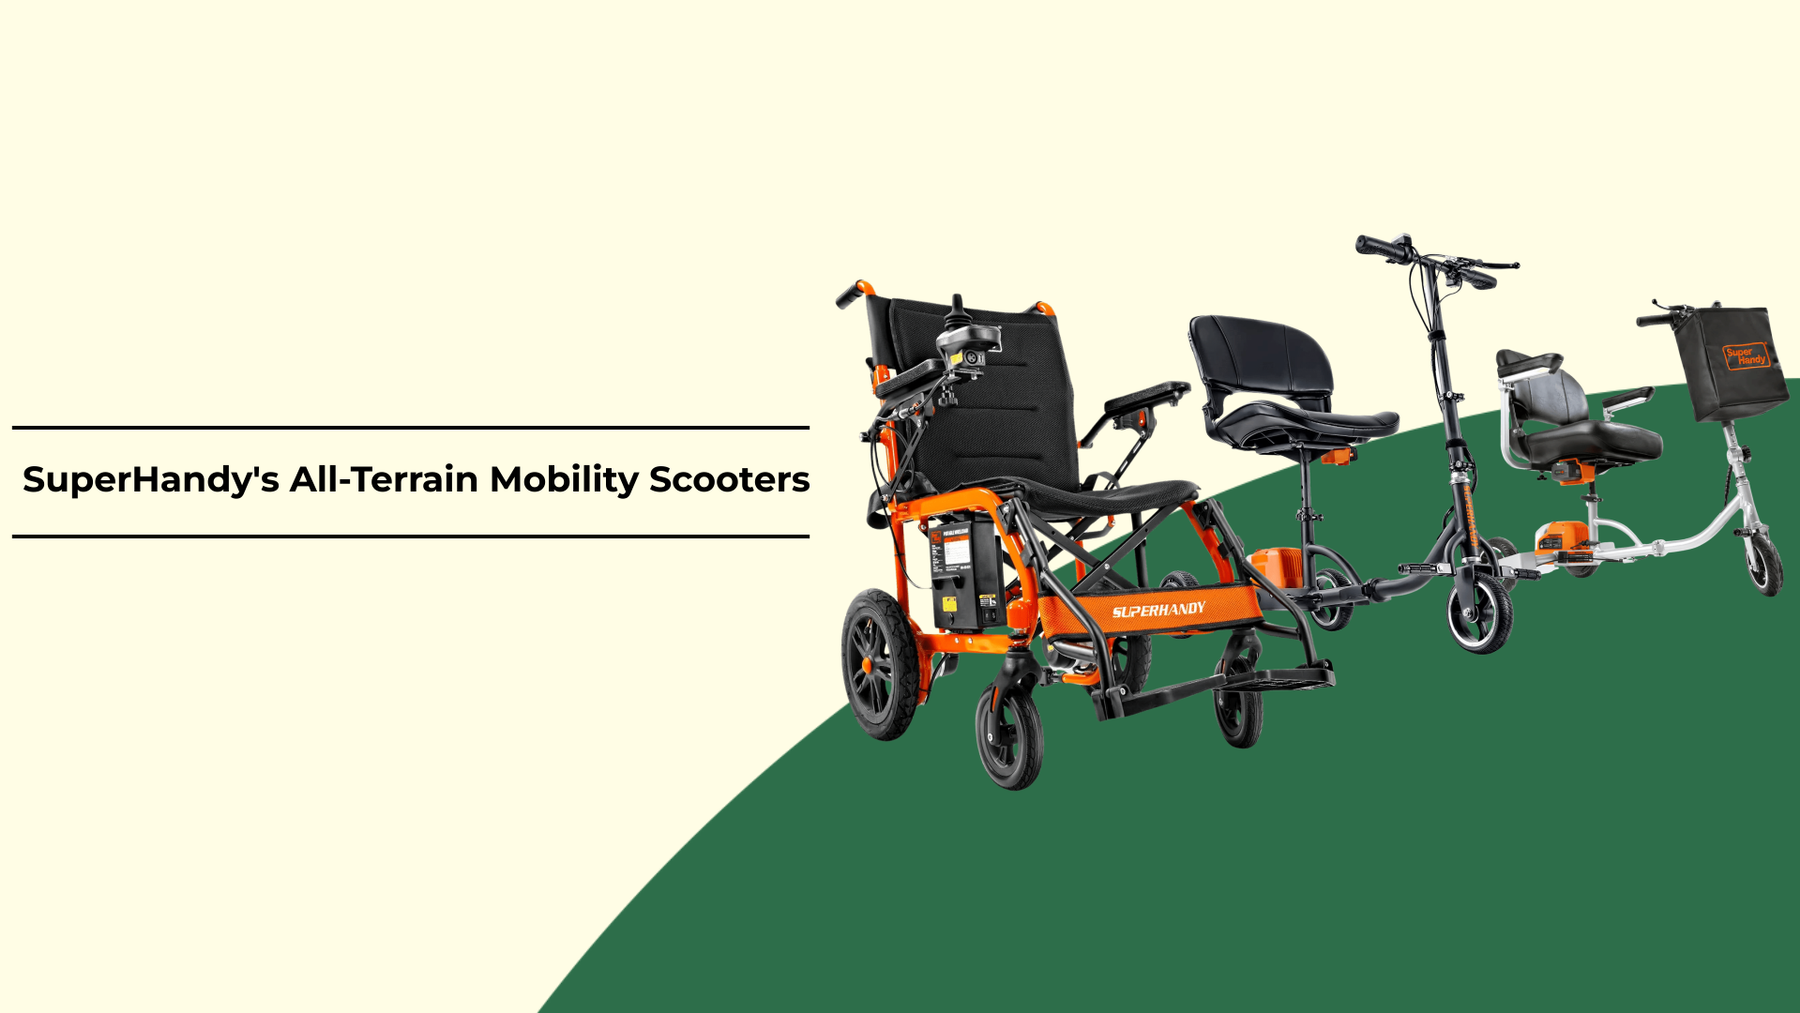 Maximize Your Productivity with SuperHandy's All-Terrain Mobility Scooters